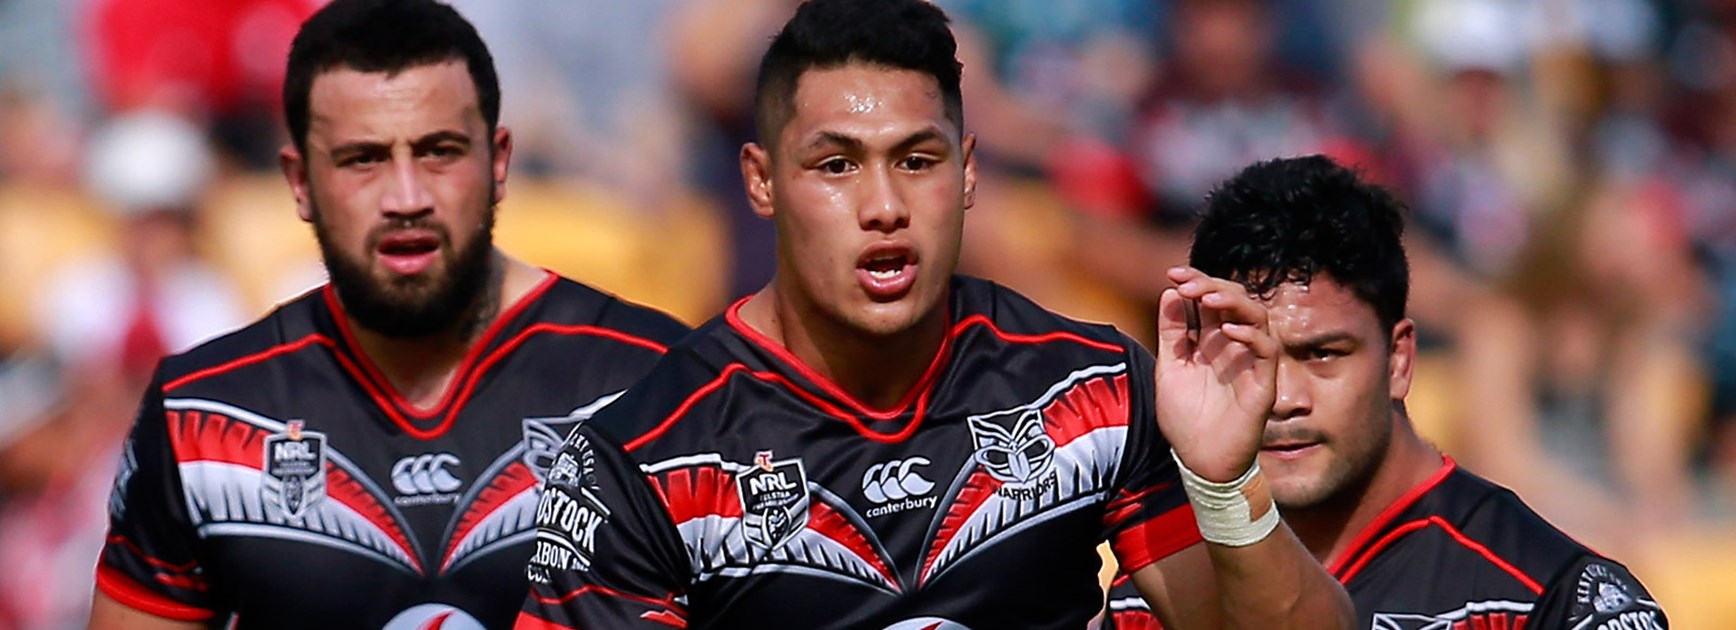 Warriors fullback Roger Tuivasa-Sheck will face the Roosters for the first time in Round 5.